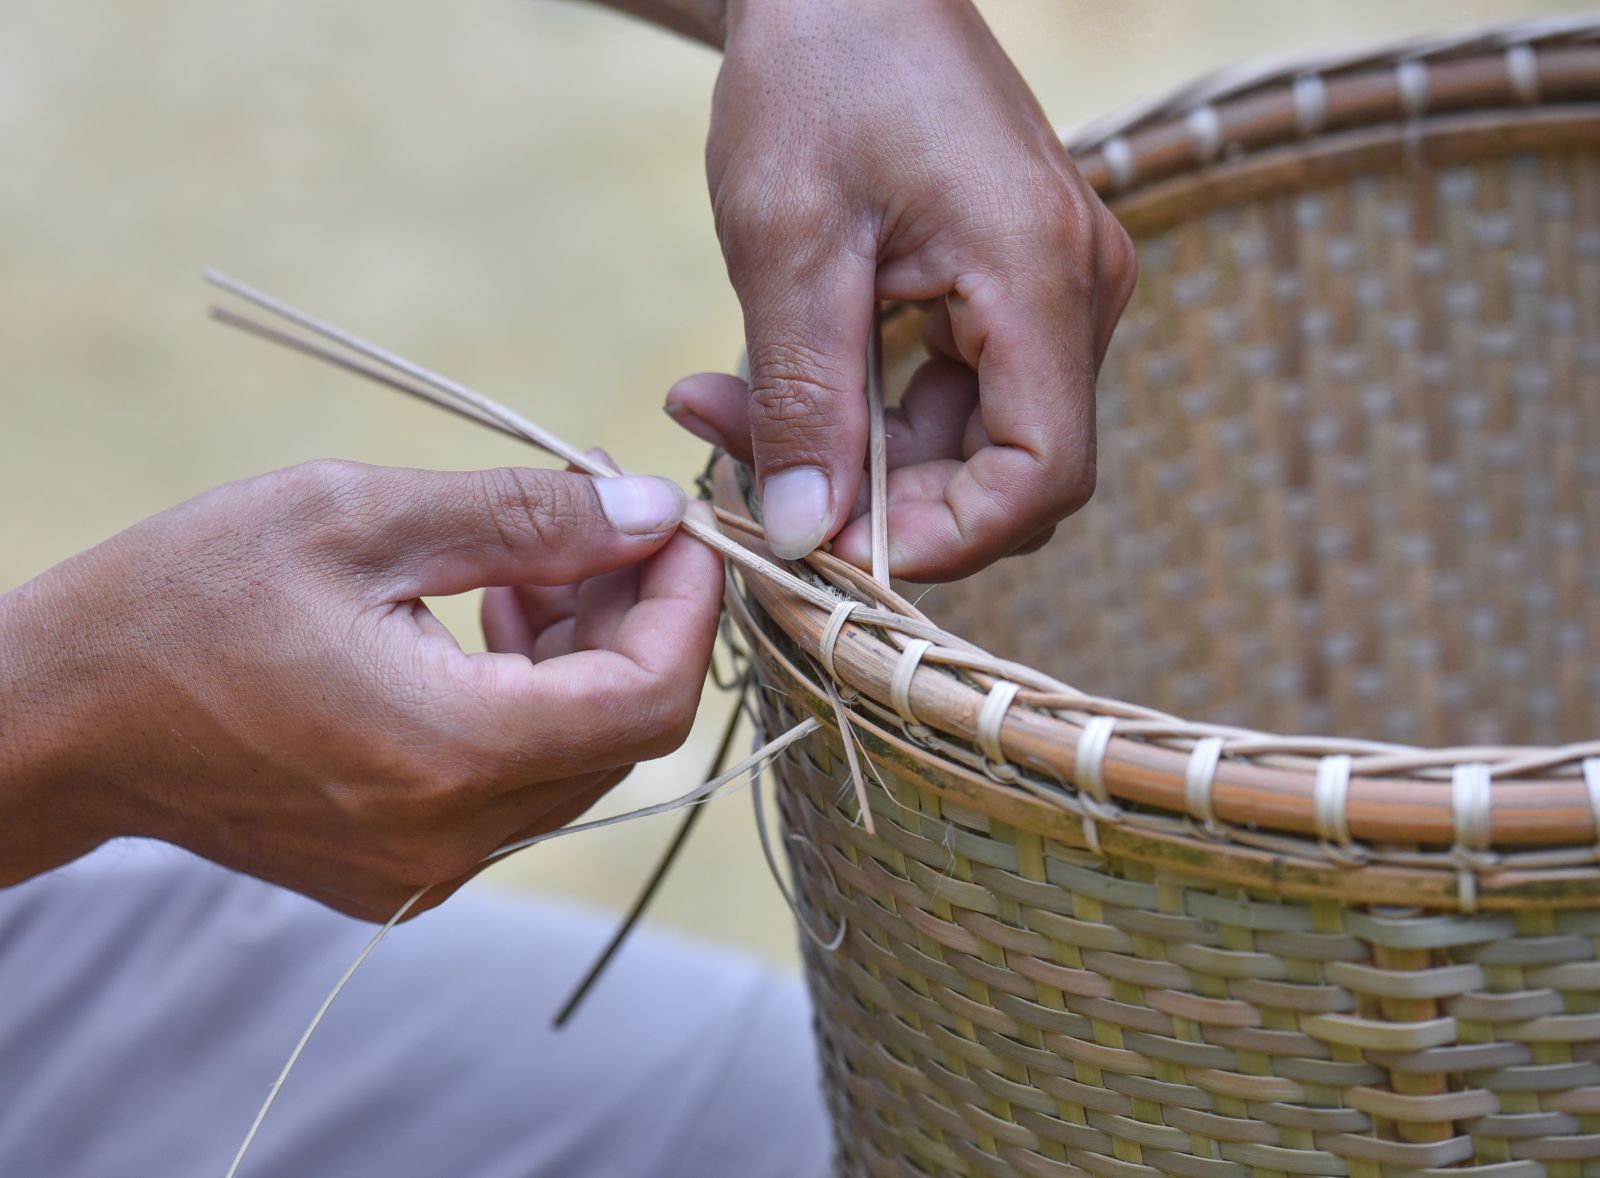 Knotting off the baskets is the last stage of creating a new basket 